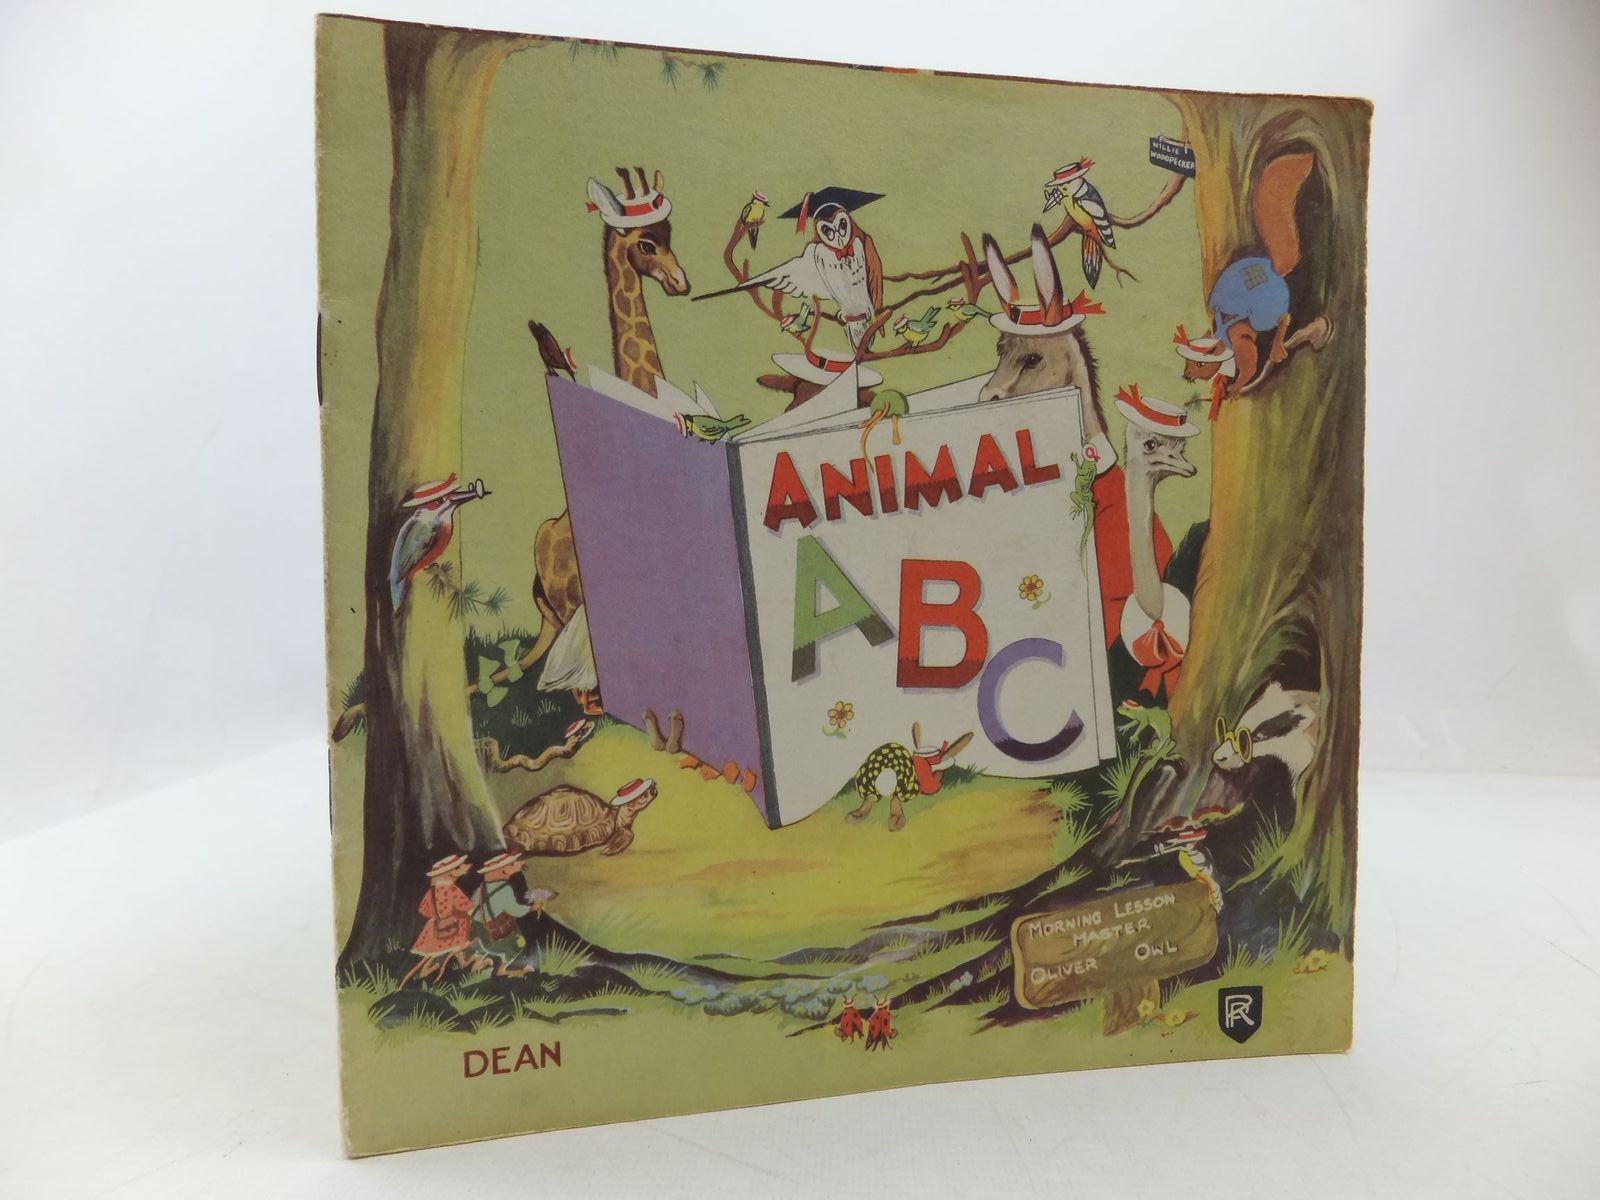 Photo of ANIMAL ABC published by Dean (STOCK CODE: 1108902)  for sale by Stella & Rose's Books